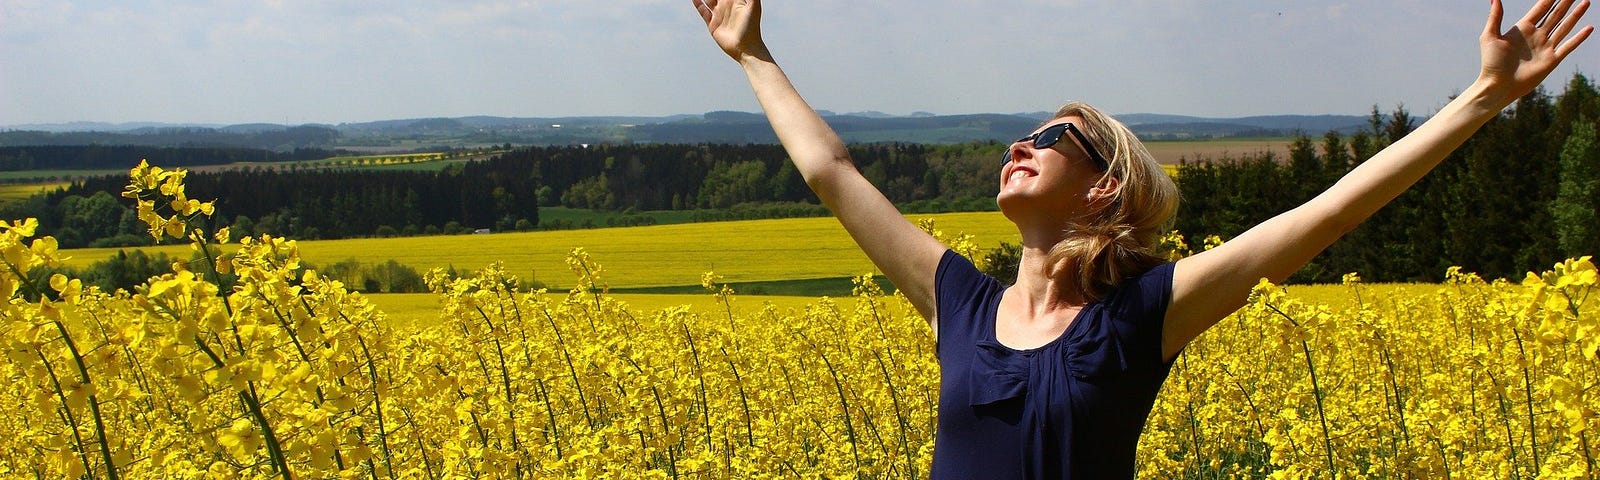 Woman with raised hands in a field of yellow flowers